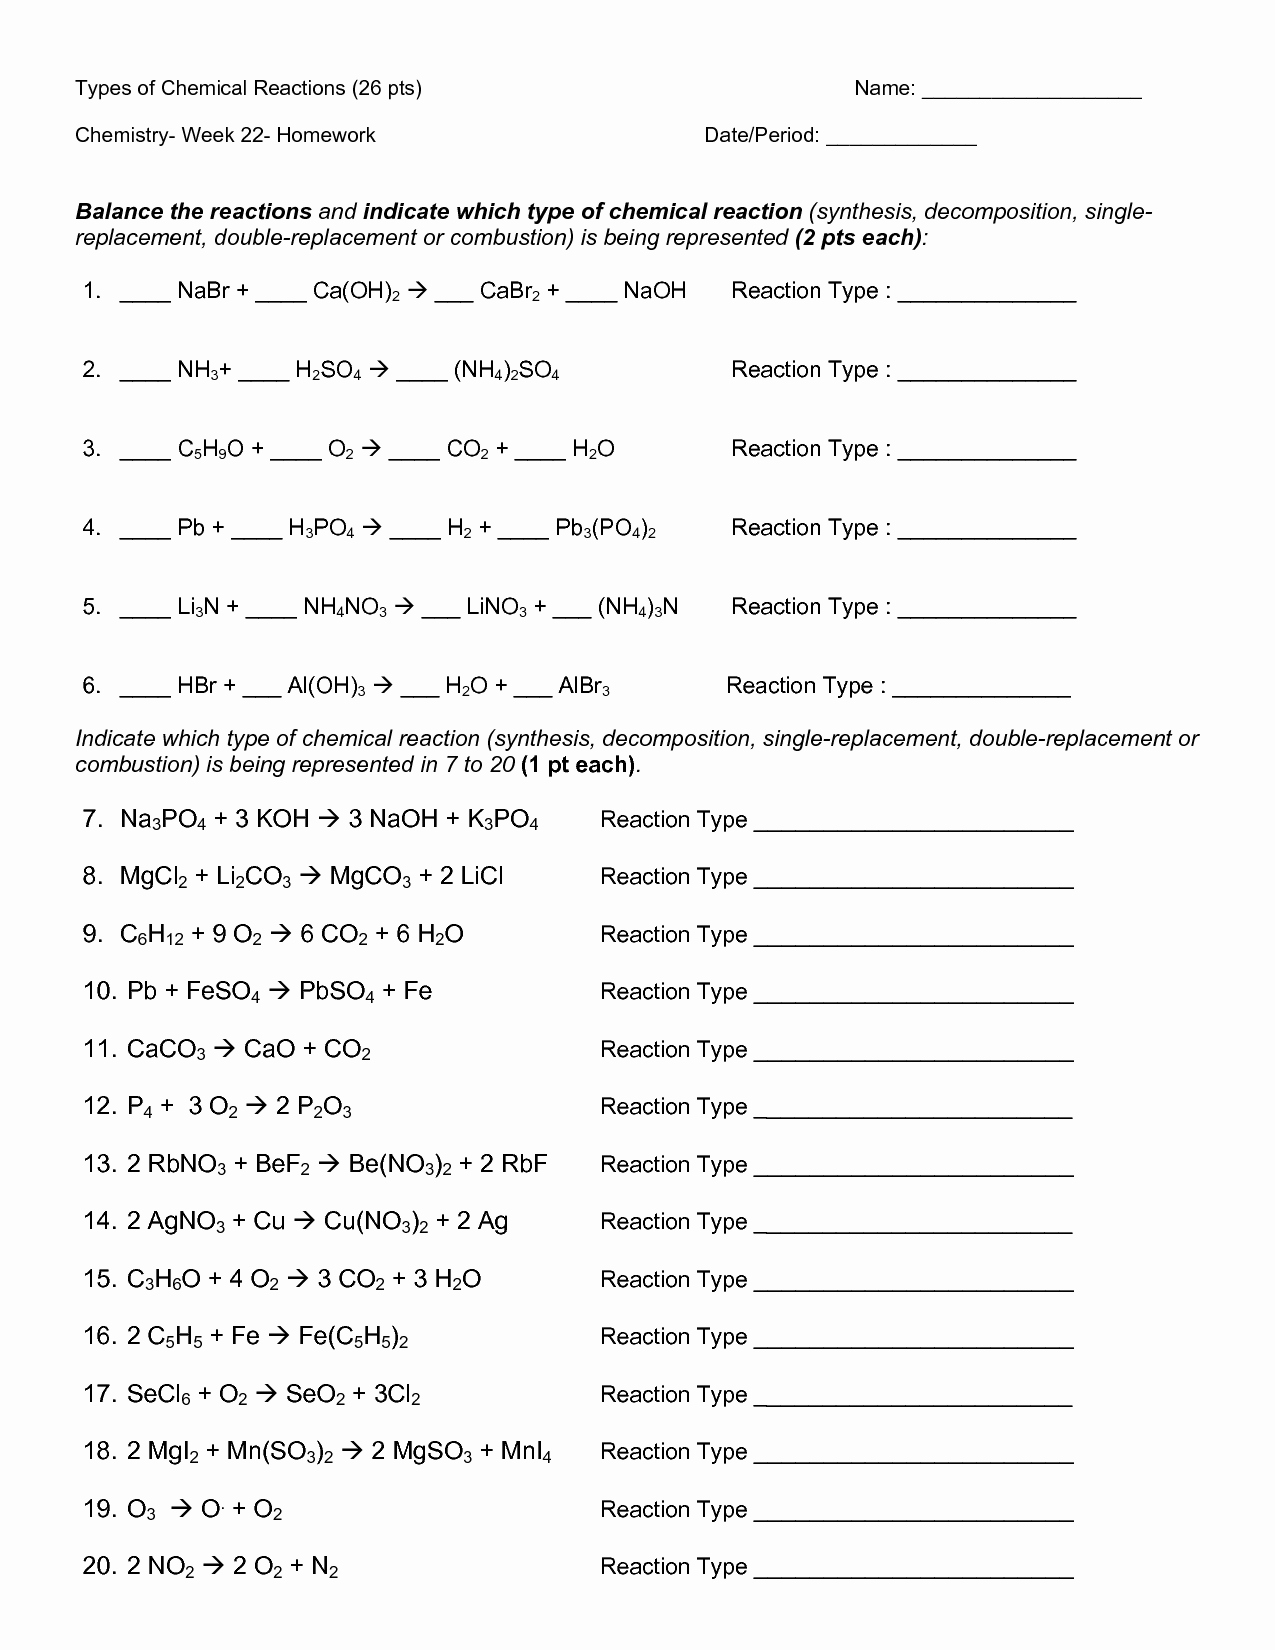 Chemical Reactions Worksheet Answers Unique 16 Best Of Types Chemical Reactions Worksheets